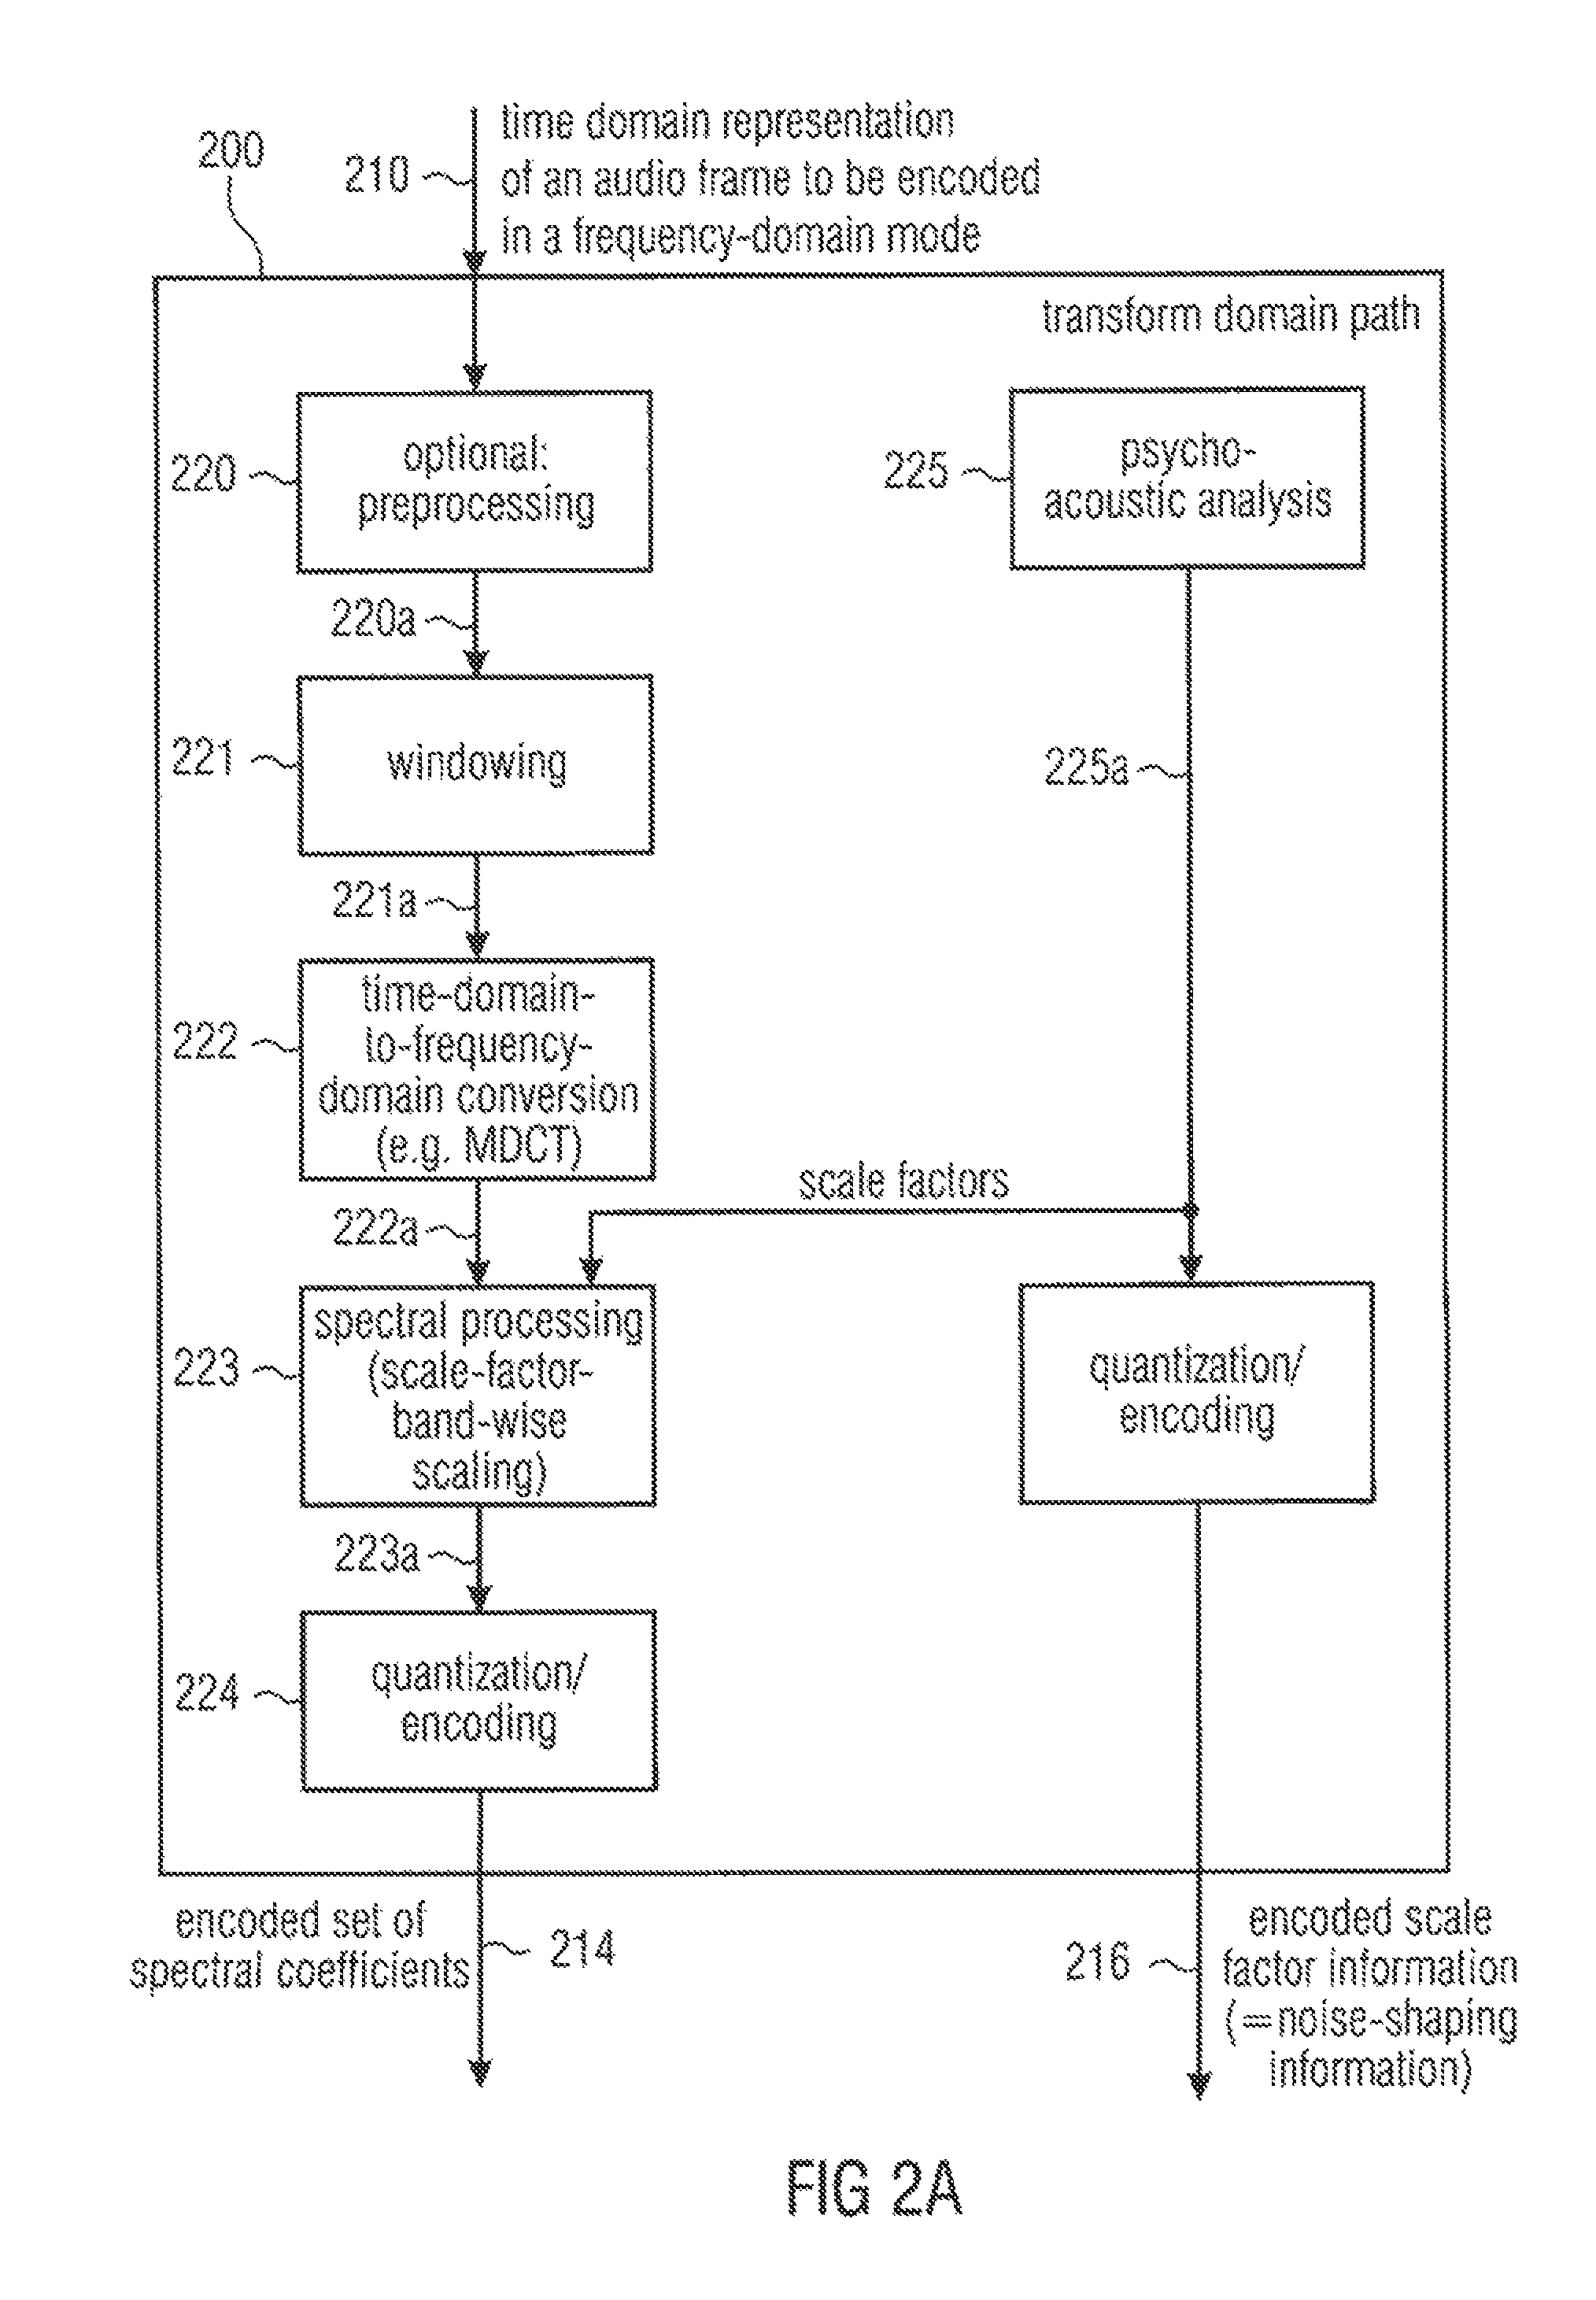 Audio signal encoder/decoder for use in low delay applications, selectively providing aliasing cancellation information while selectively switching between transform coding and celp coding of frames